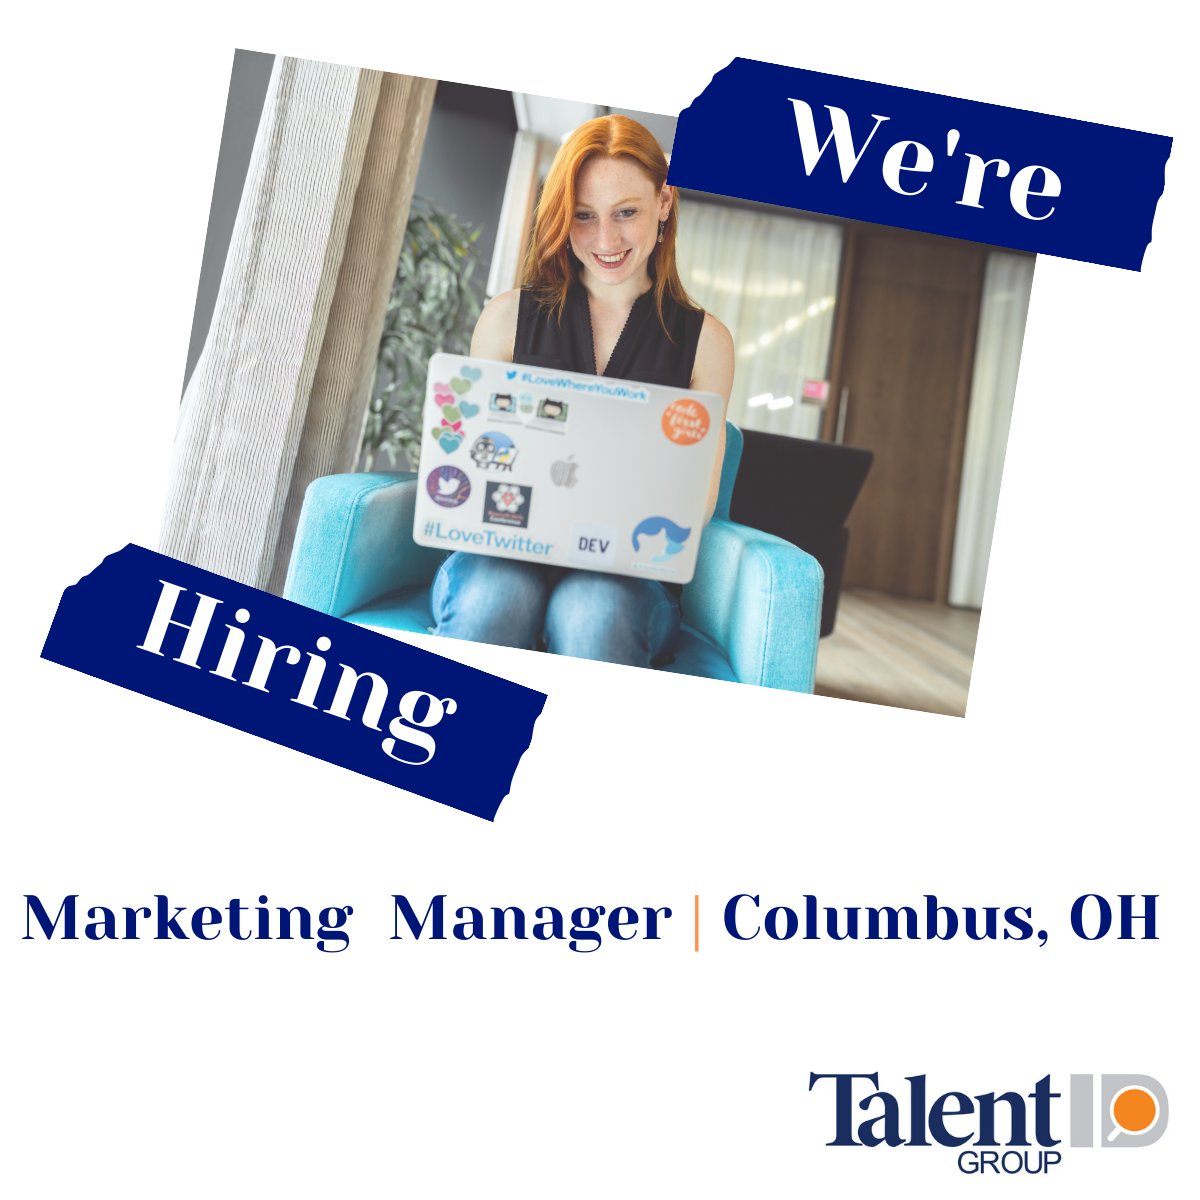 Job Alert: Do you want to drive marketing strategy for a family owned ecommerce healthcare company based in Columbus, OH? Check out our Marketing Manager role and more! buff.ly/3heDfXc #hiring #jobsearch #TalentIDGroup